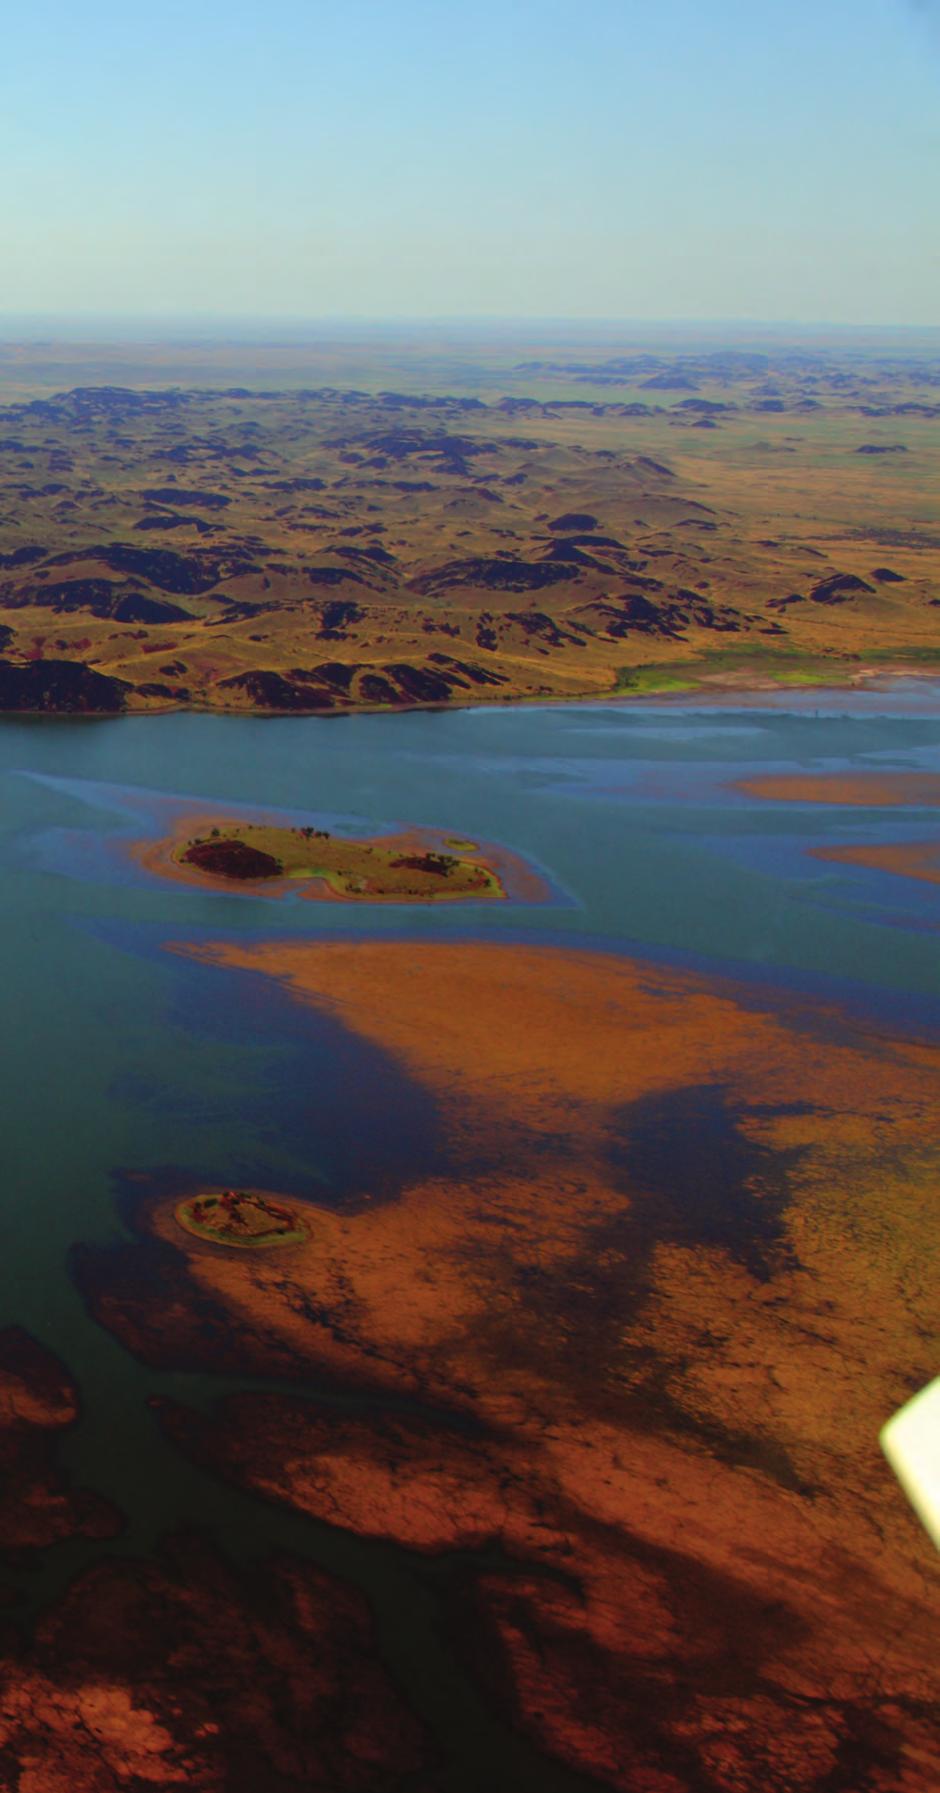 The Pilbara is a resources region one of the strongest in the world.